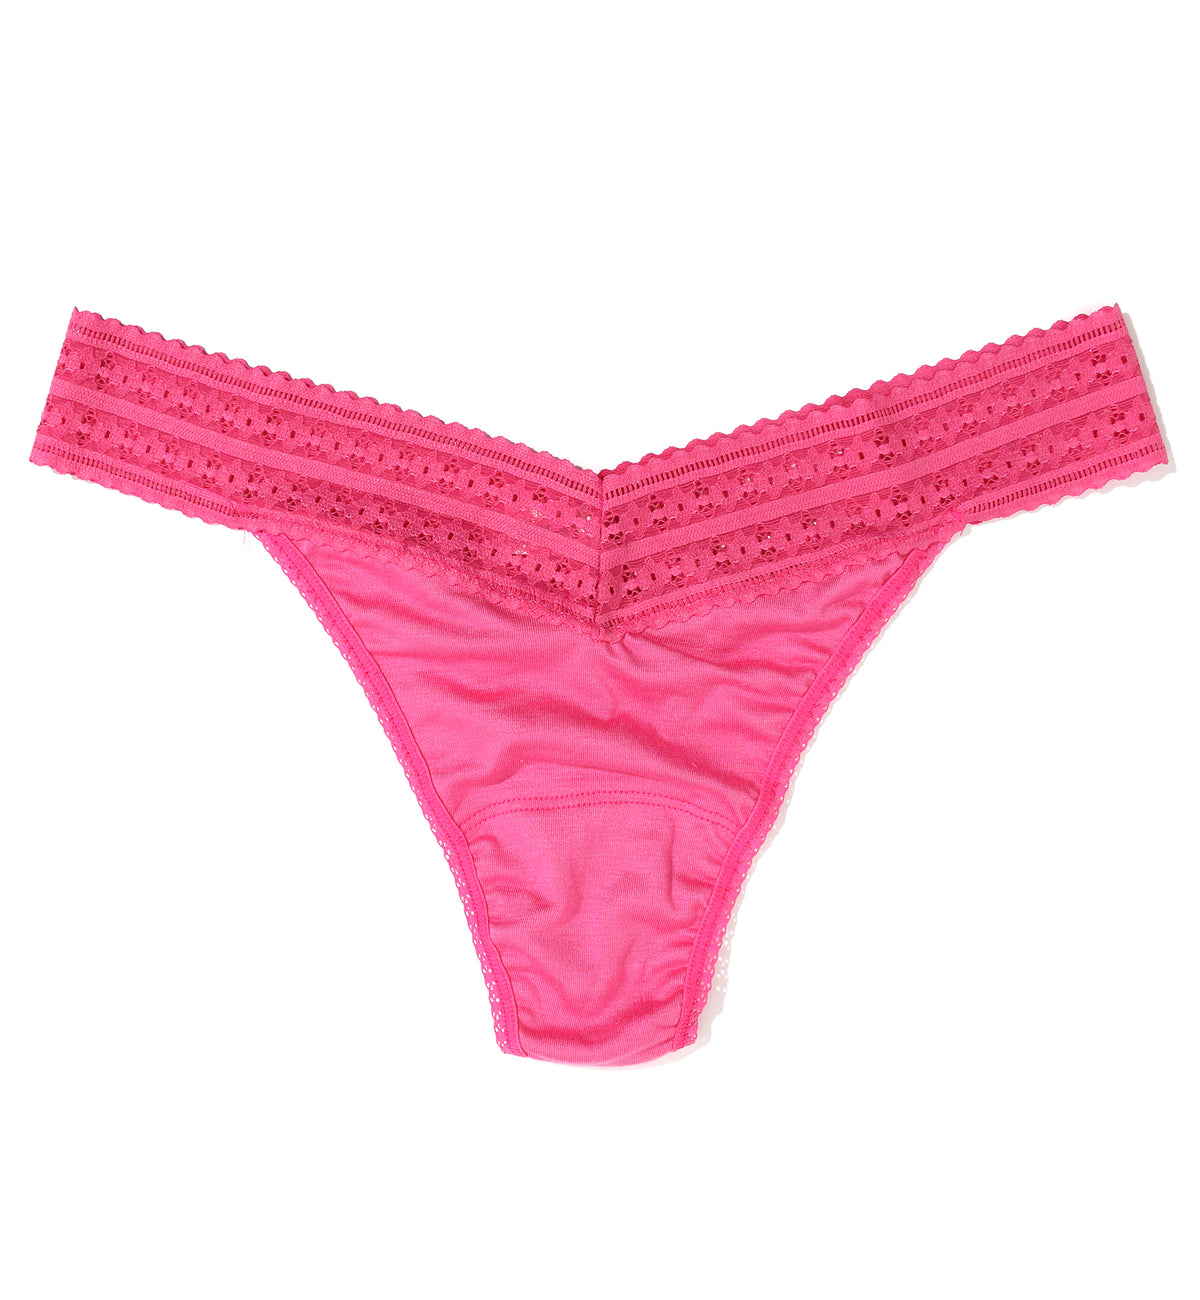 Hanky Panky DreamEase Original Rise Thong (631104),Kiss from a Rose - Kiss from a Rose,One Size